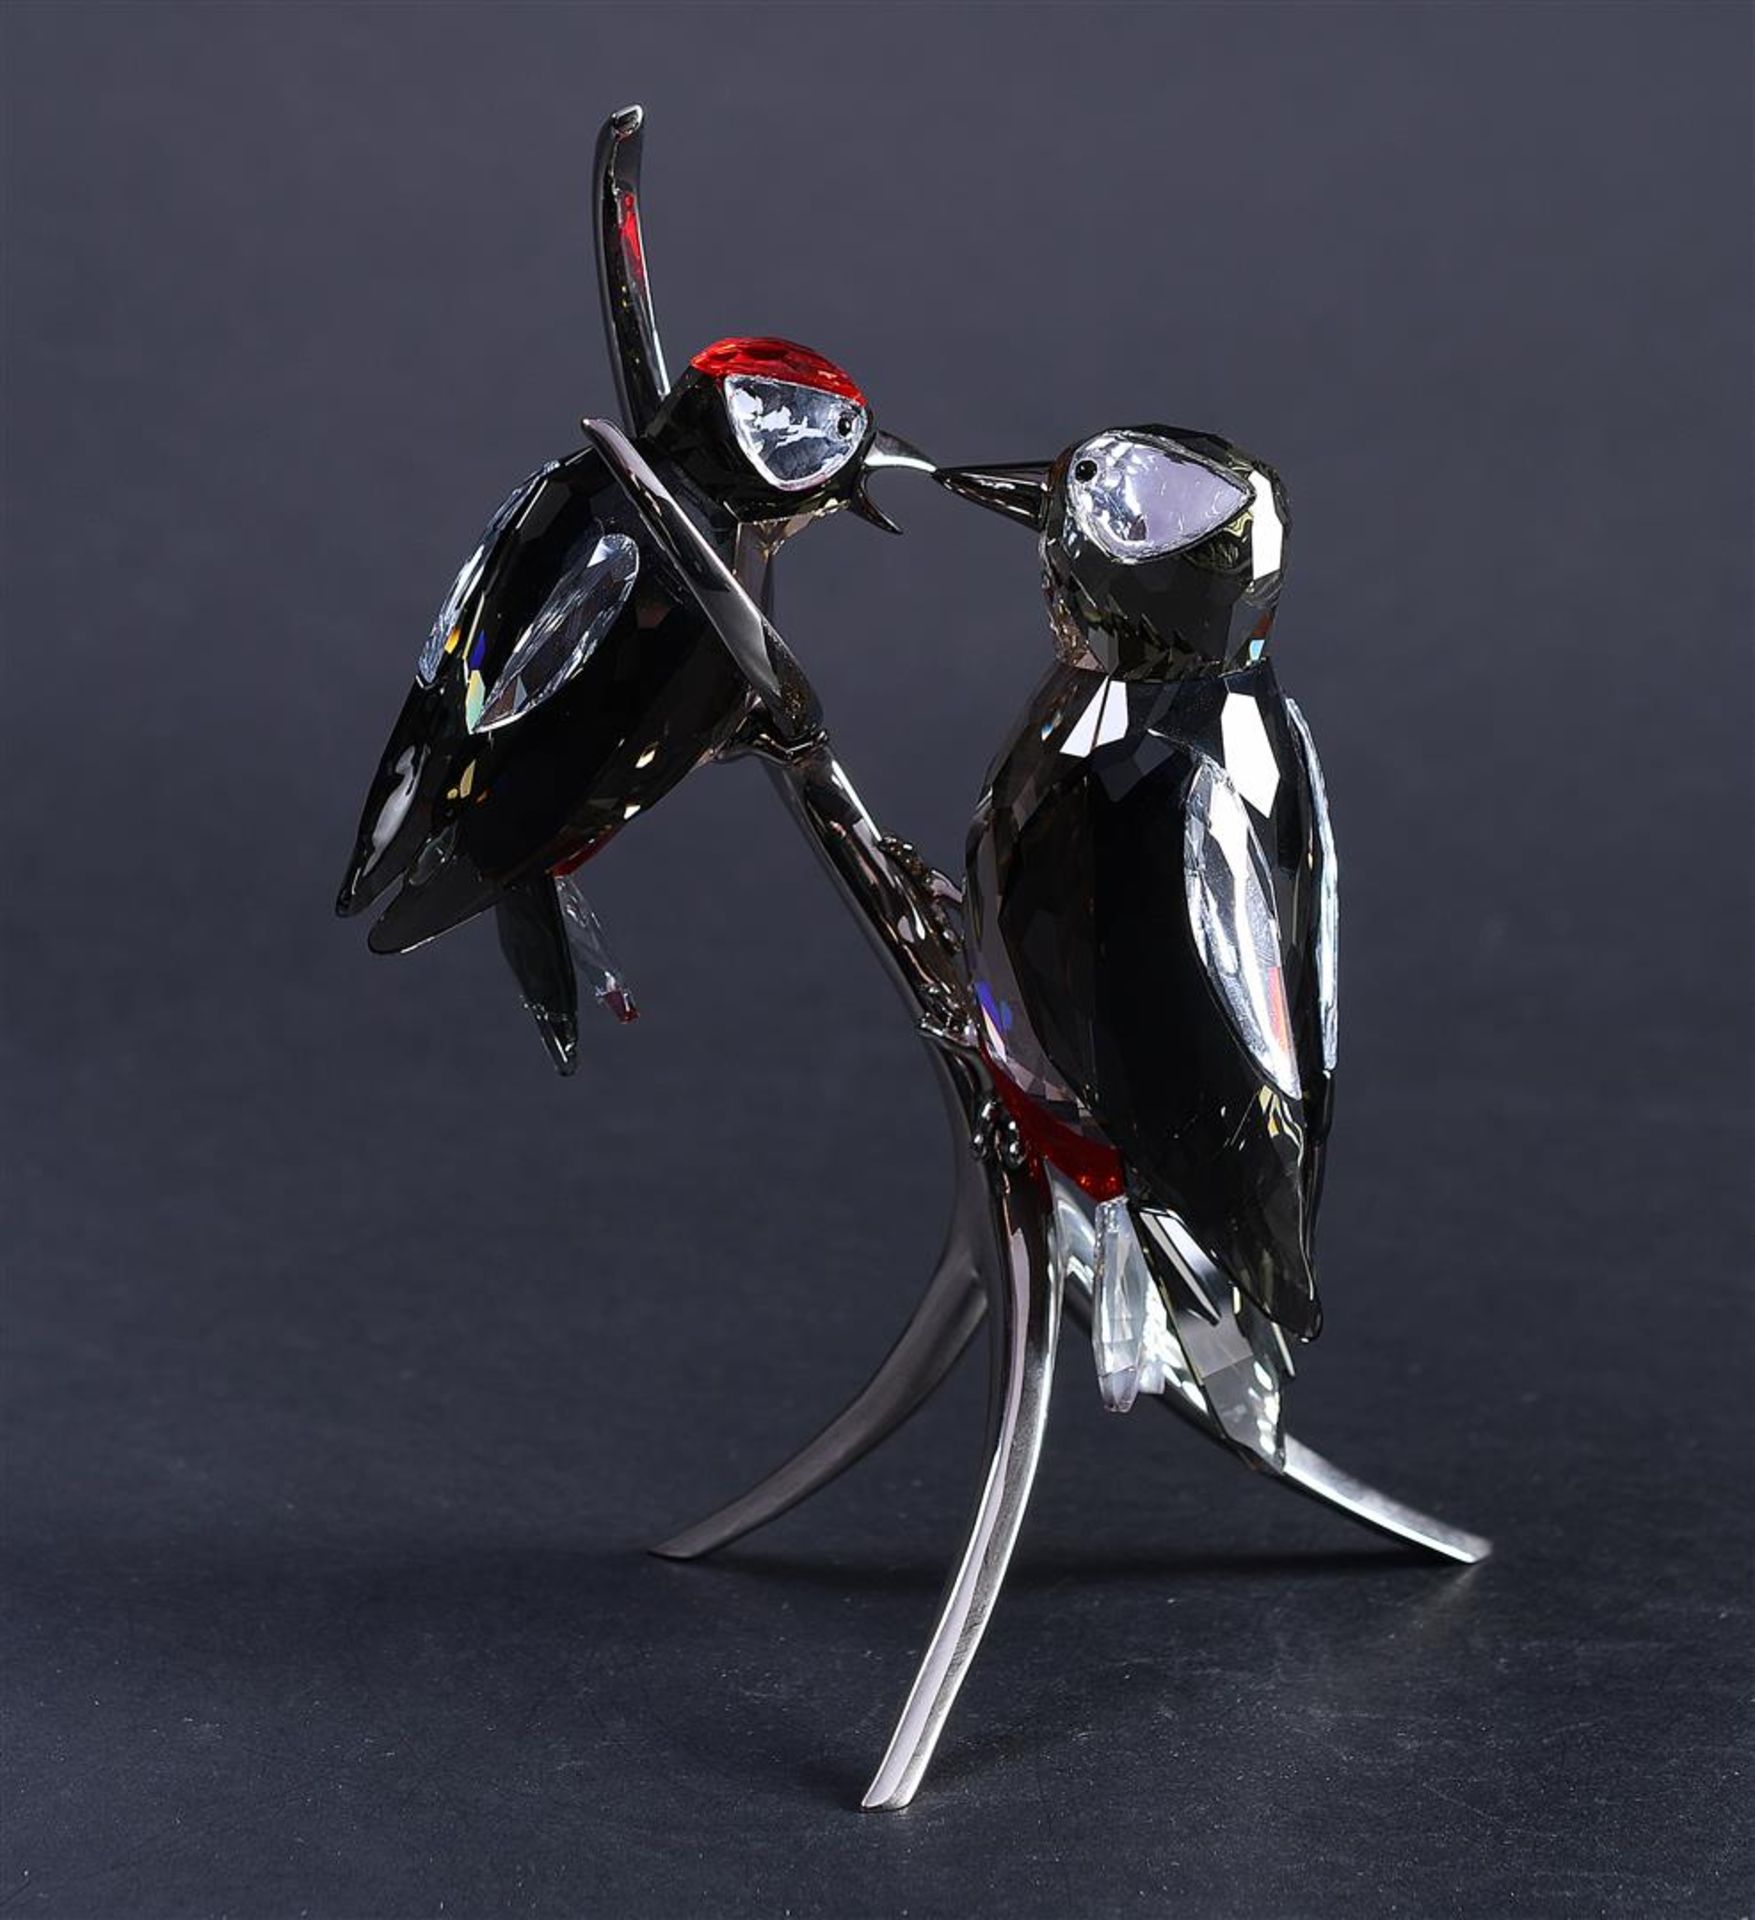 Swarovski, woodpeckers, Year of issue 2009,957562. Includes original box.
H. 21,9 cm. - Image 3 of 9